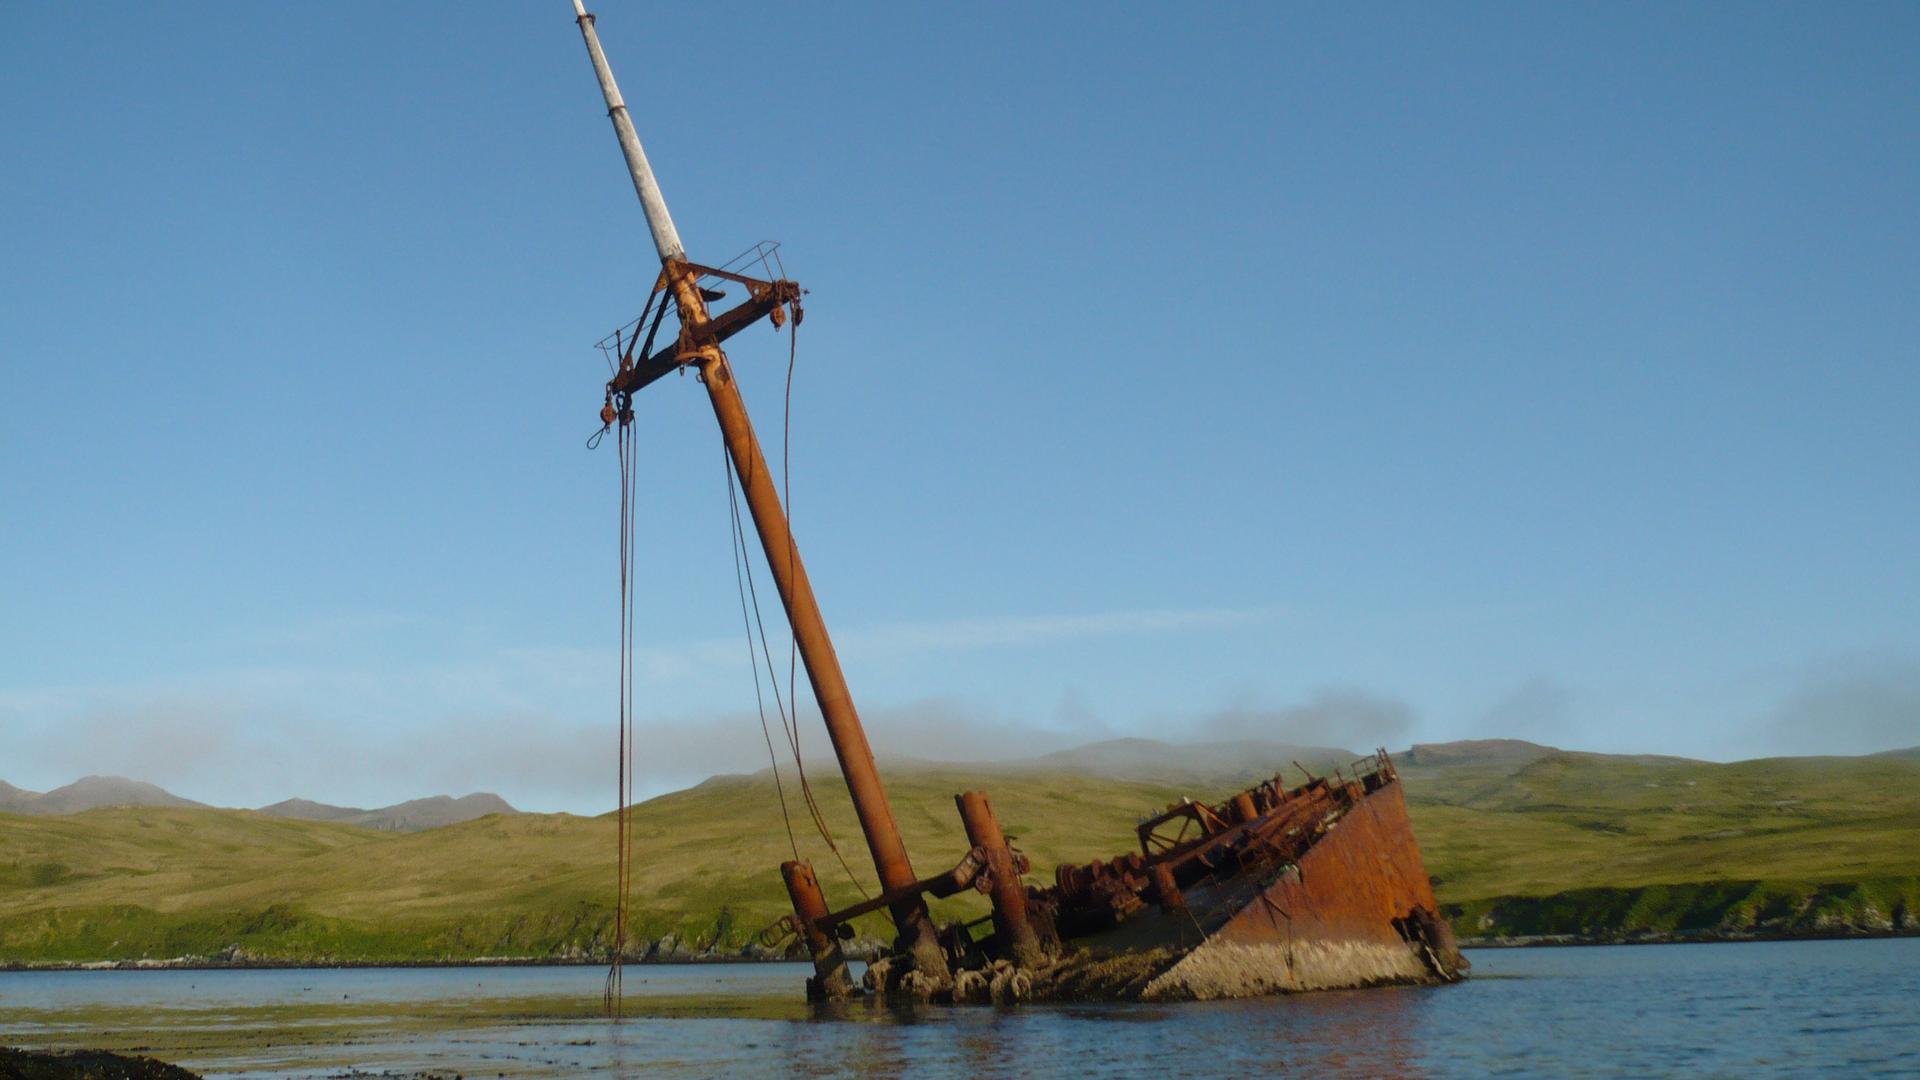 The rusted Japanese transport, Borneo Maru, decades after it was beached off the island of Kiska.